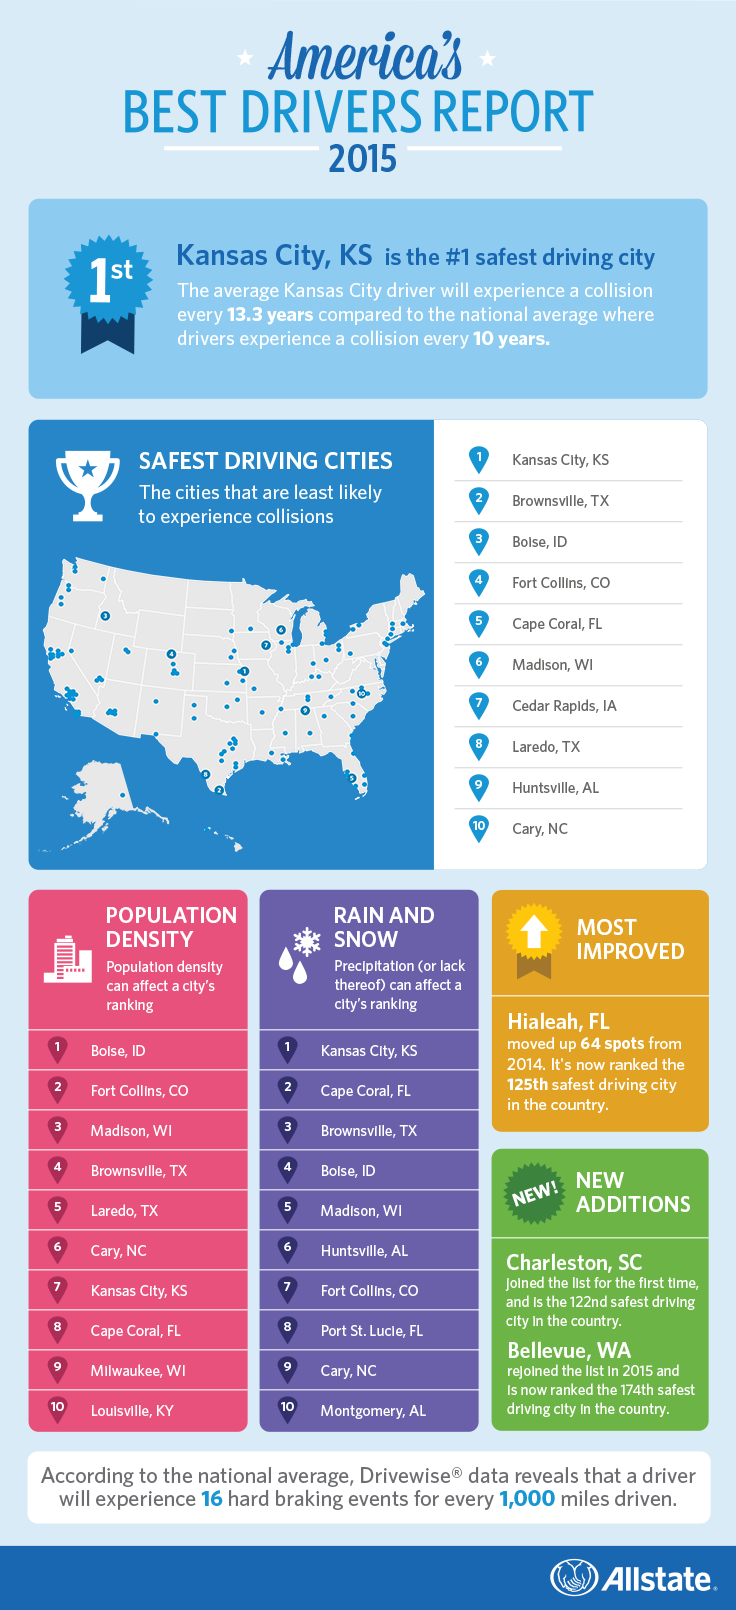 Allstate's America's Best Drivers Report 2015